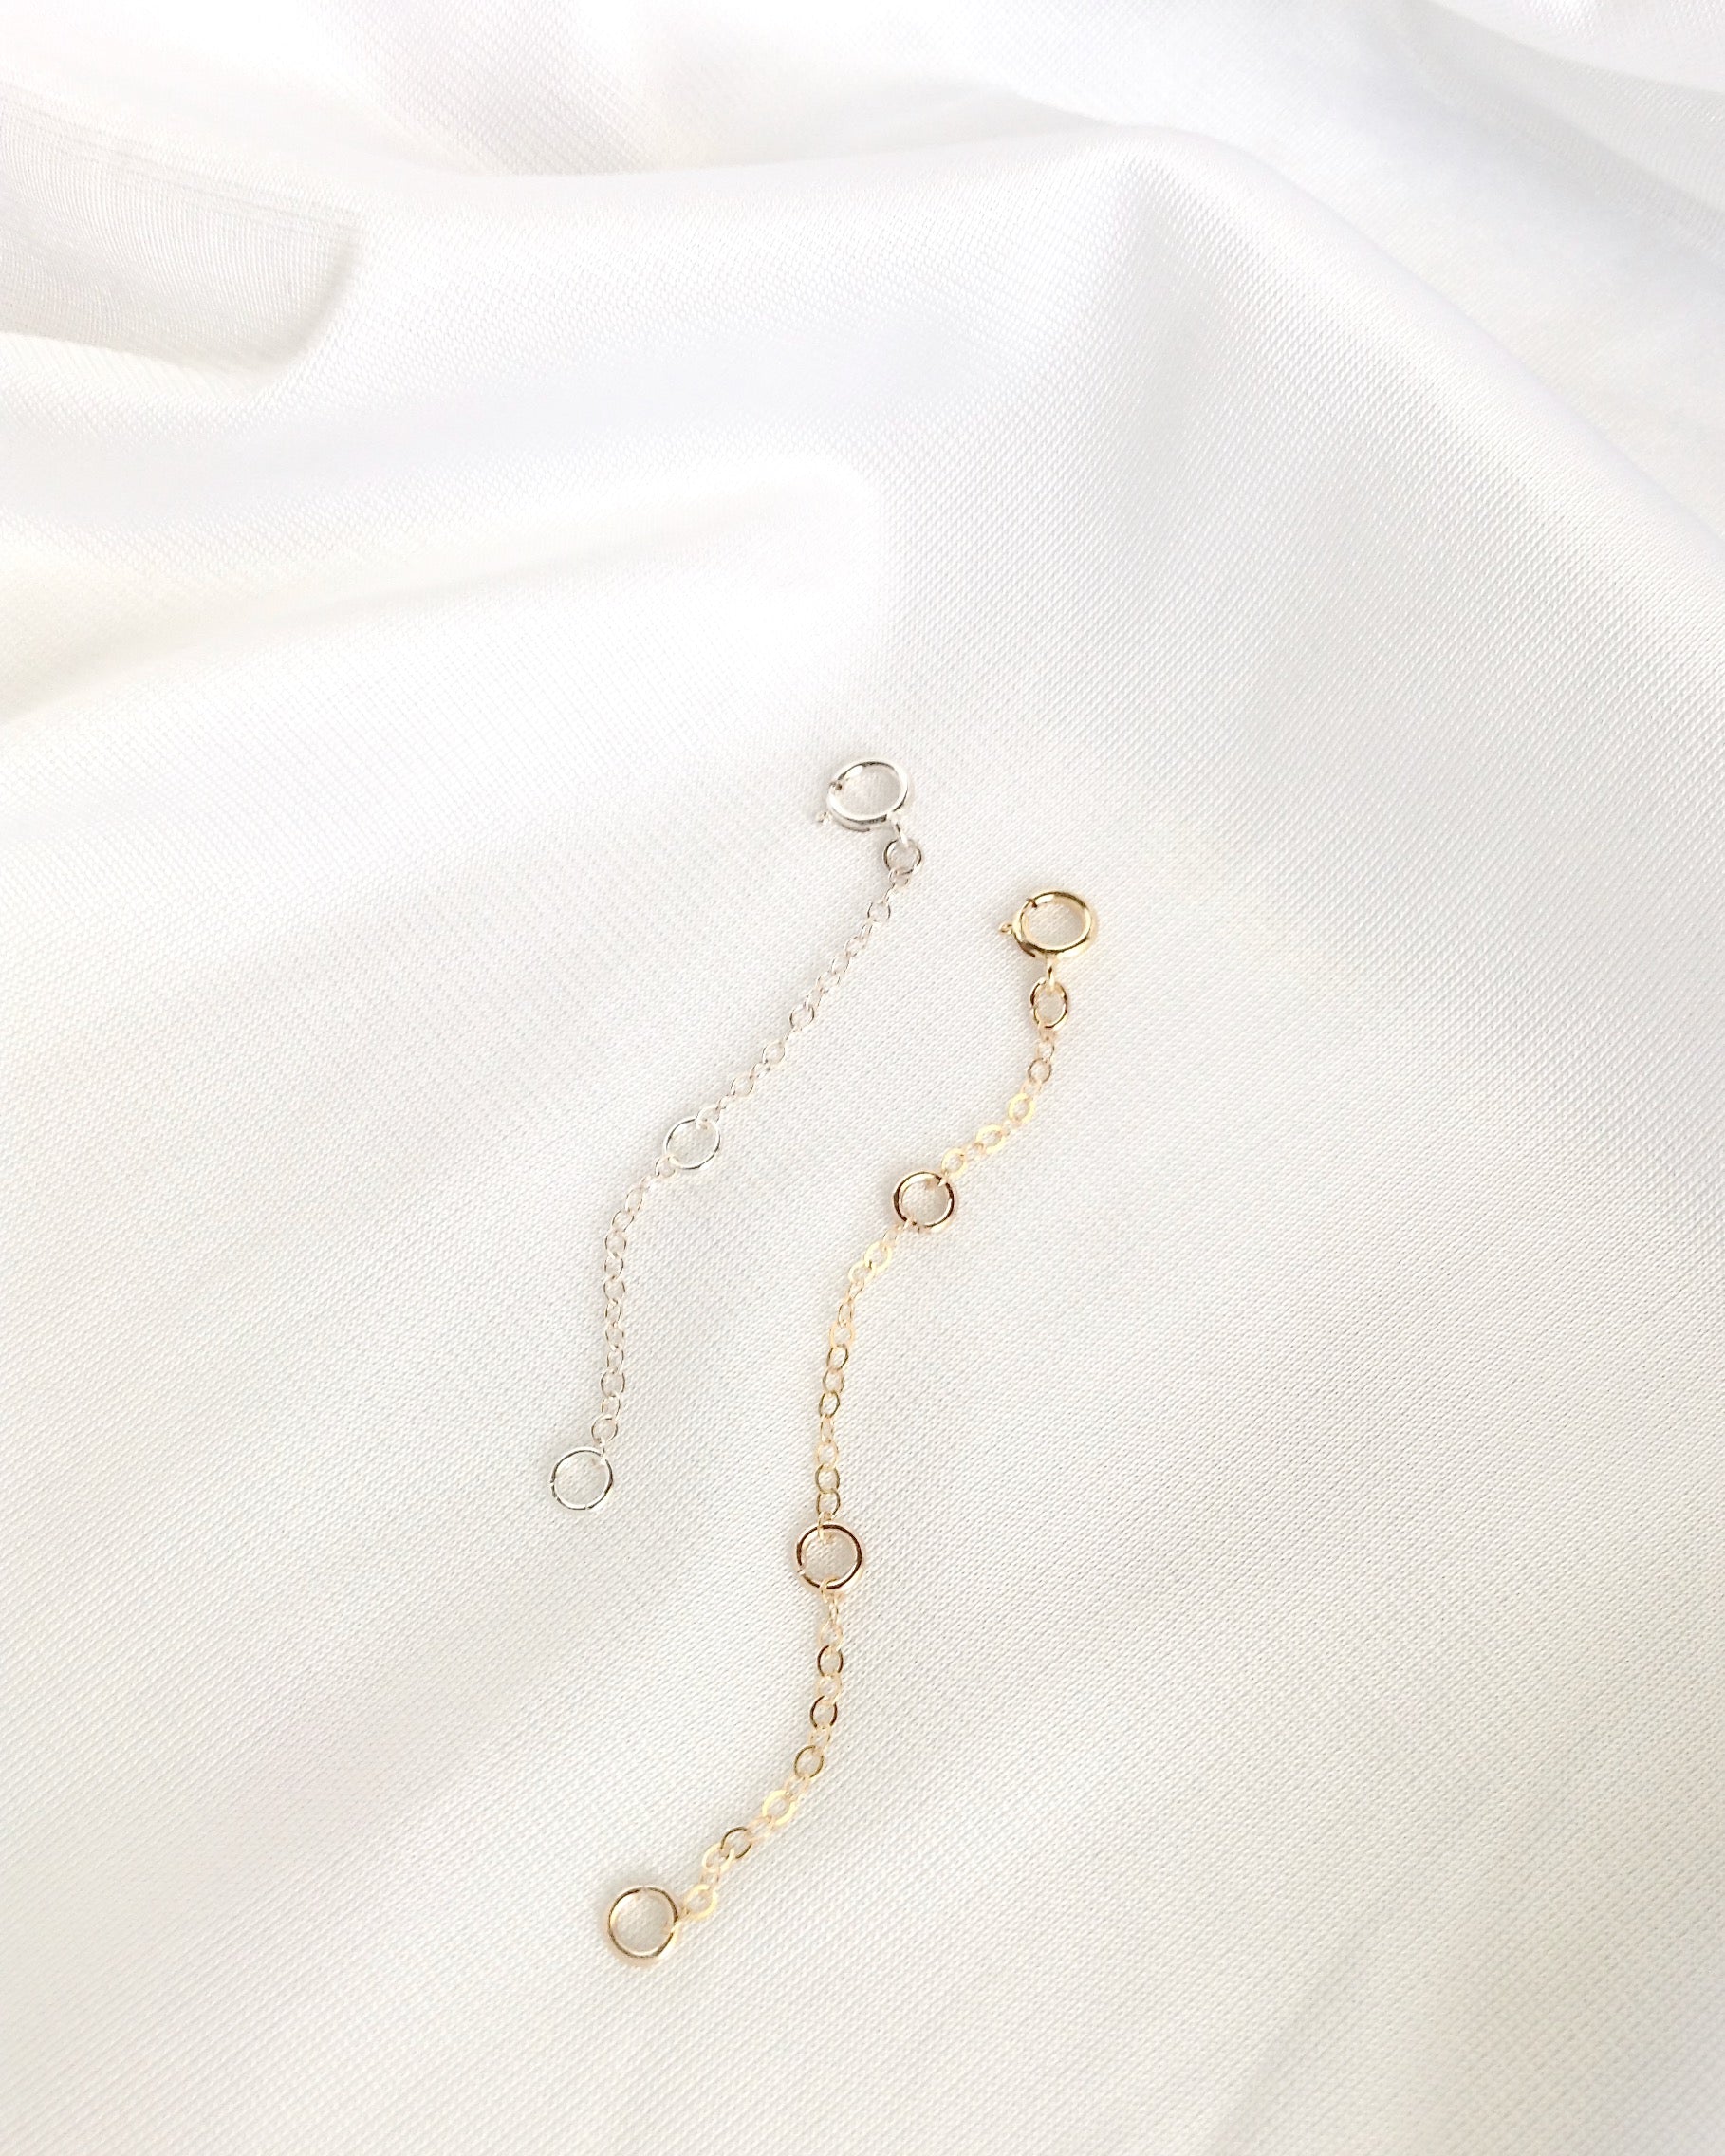 Adjustable Bracelet Extender Chain in Gold Filled or Sterling Silver | IB Jewelry